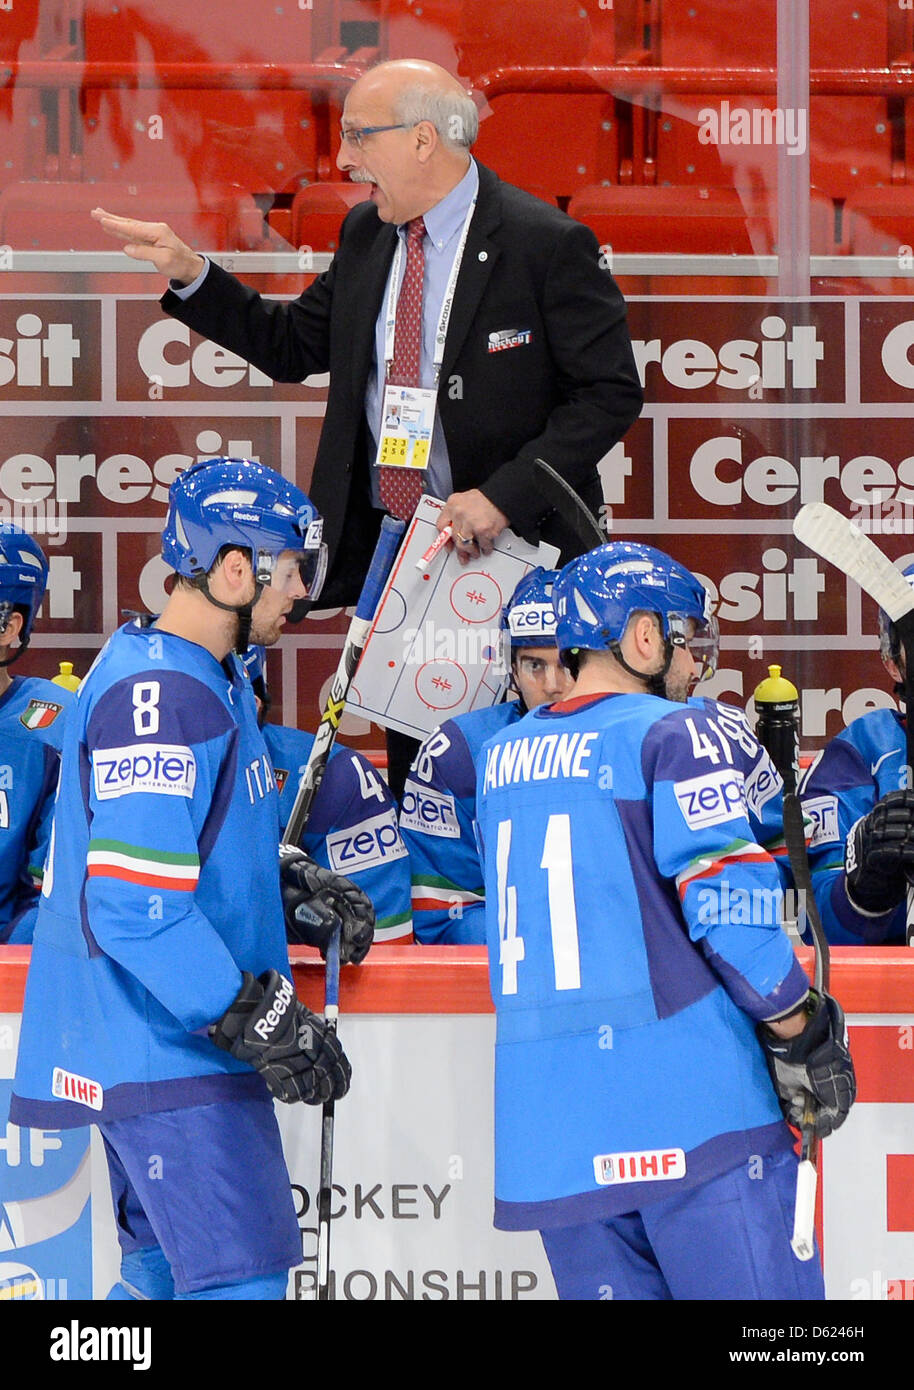 Italy's head coach Rick Cornacchia (C) gestures during the Ice Hockey World  Championships preliminary round match between Italy and Czech Republic at  the Ericsson Globe Arena in Stockholm, Sweden, 11 May 2012.